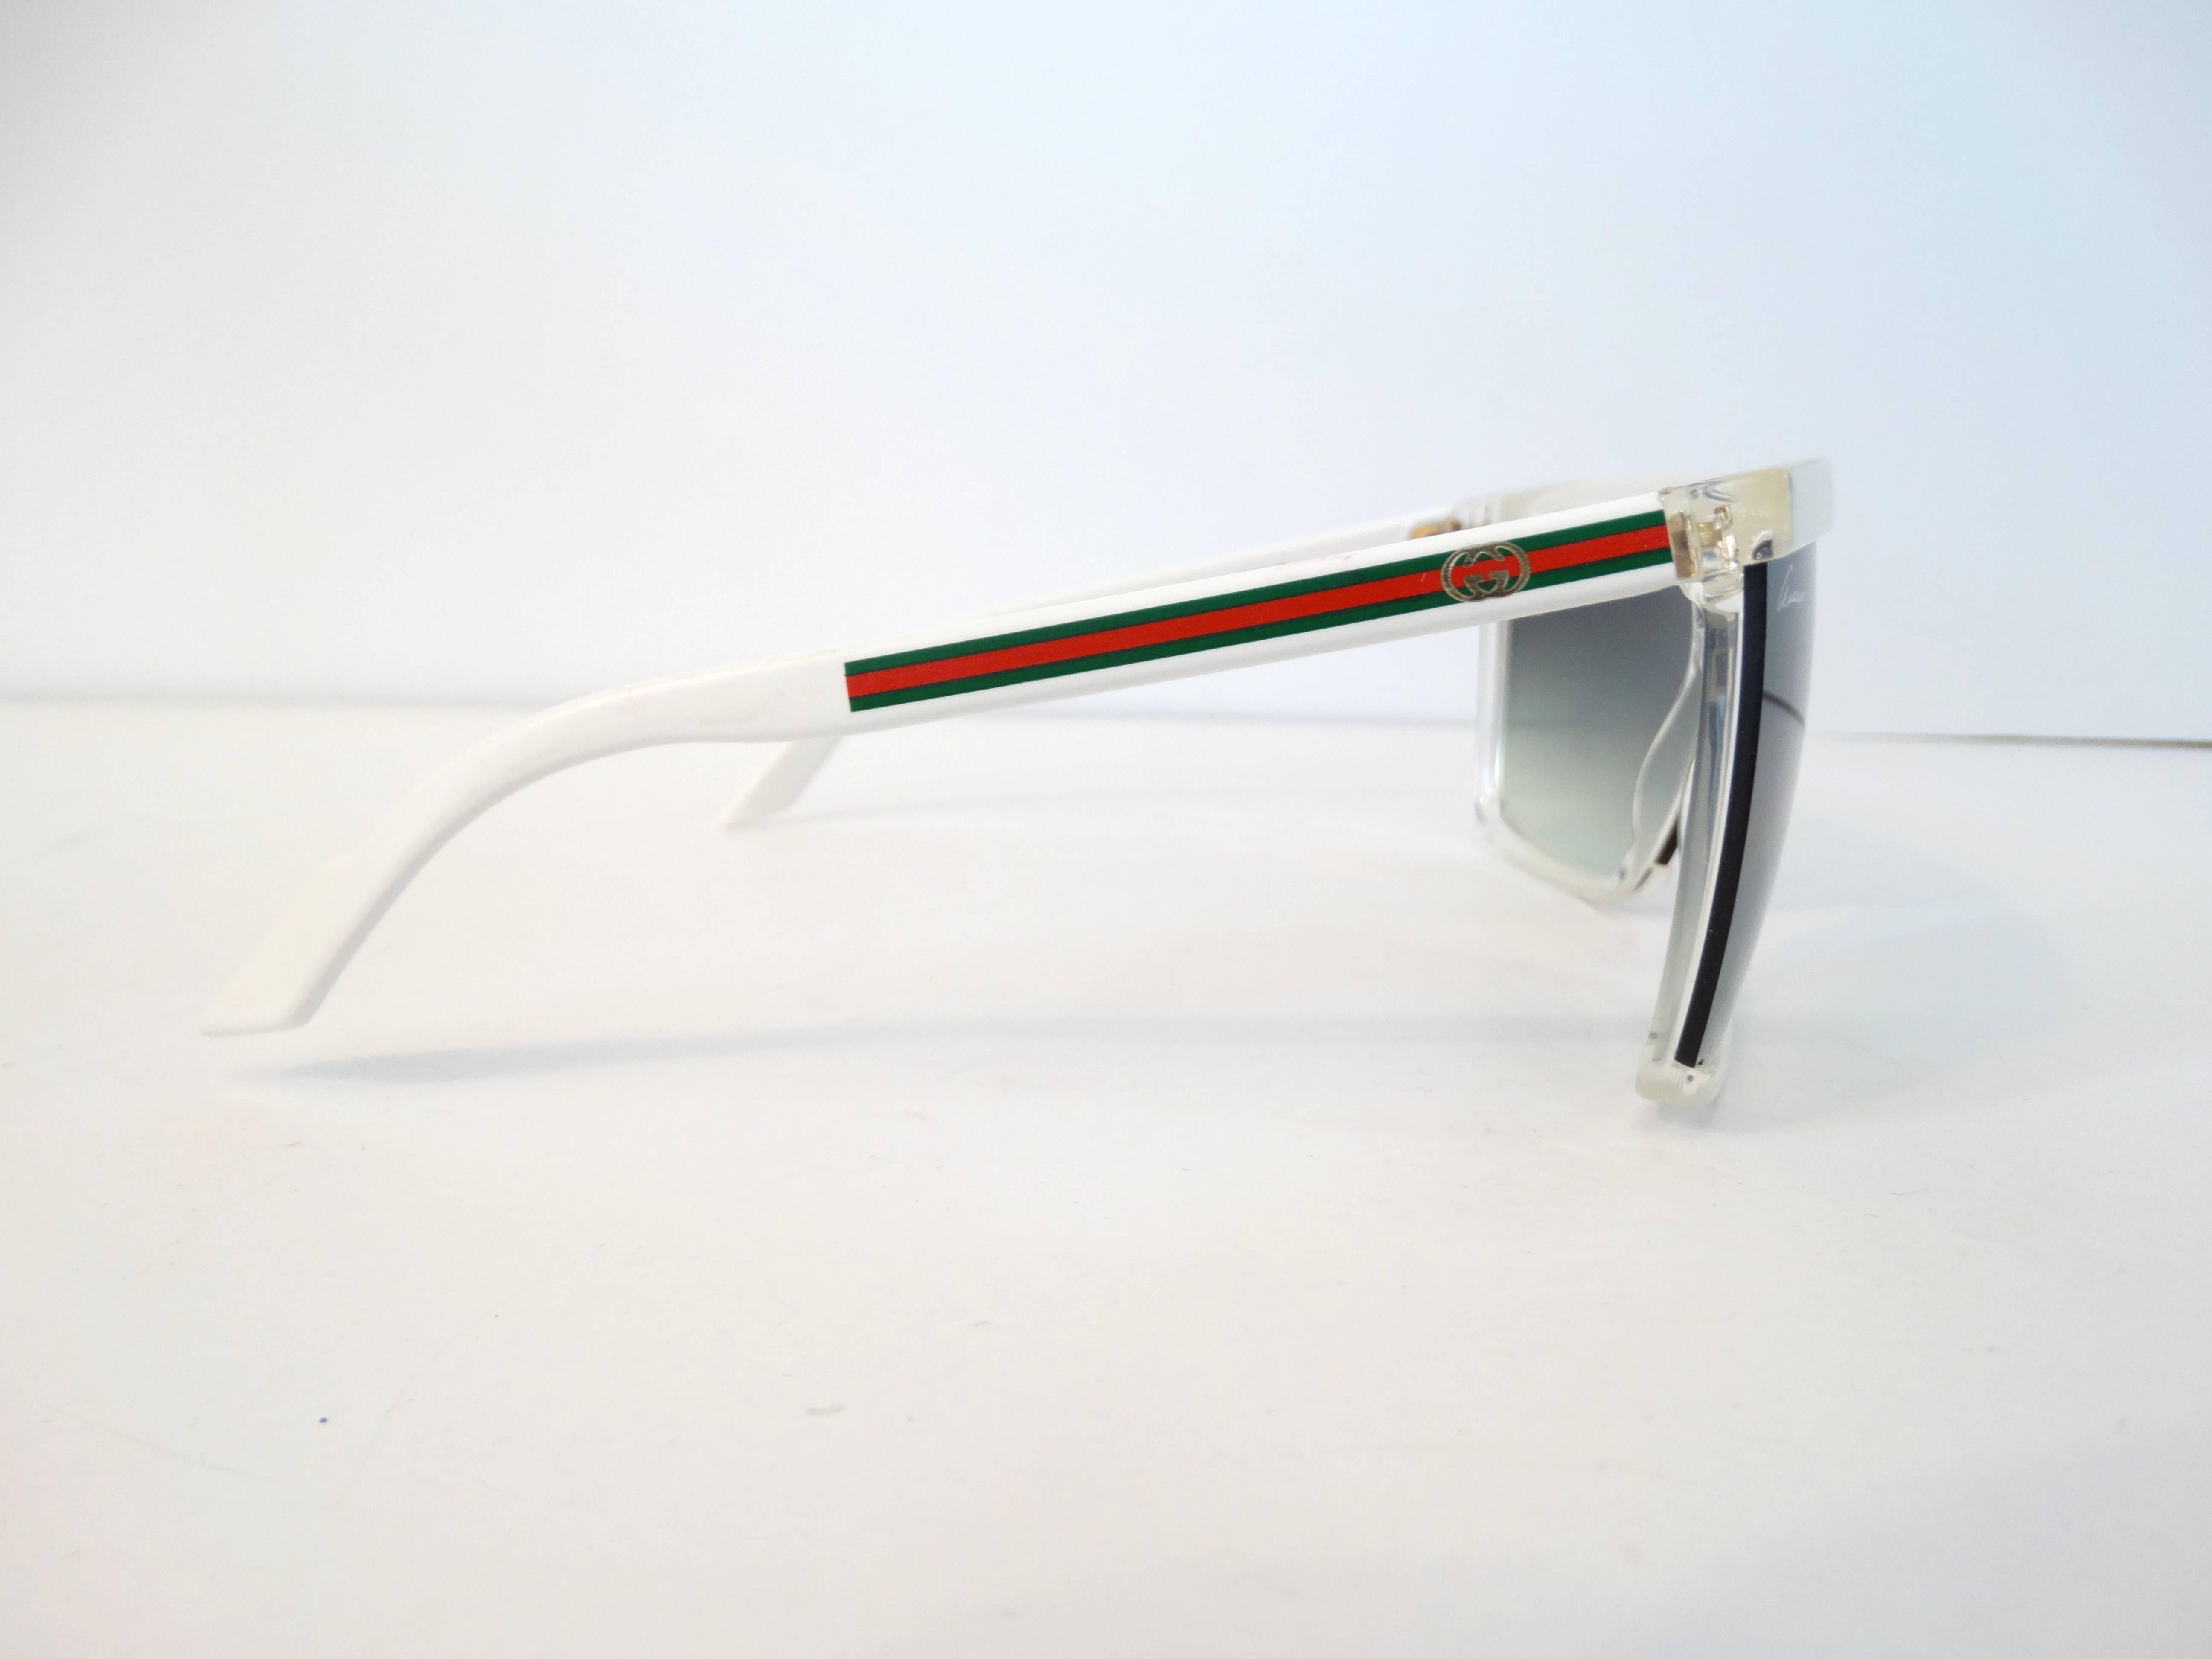 These fabulous Retro inspired Gucci sunglasses in bright white are made from a natural material that is derived from ricinus, the castor-oil plant – highlighted by eye-catching colour combinations in shades of red, white, green as well as iconic